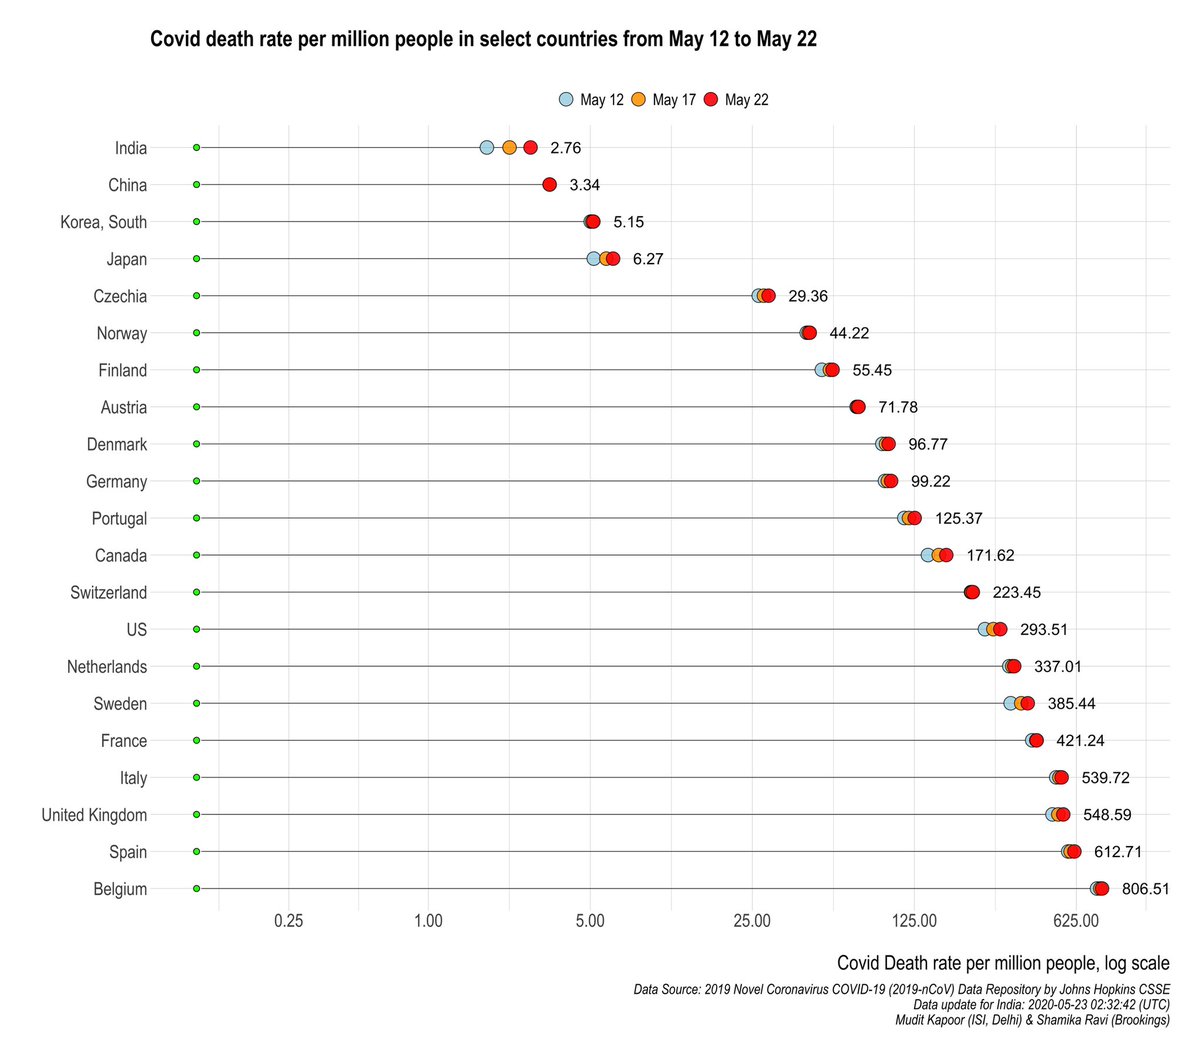 COVID death rate per million:1) Low and rising: India, Japan2) High and rising: UK, Sweden, US, Canada 3) Belgium: v high.... by far.